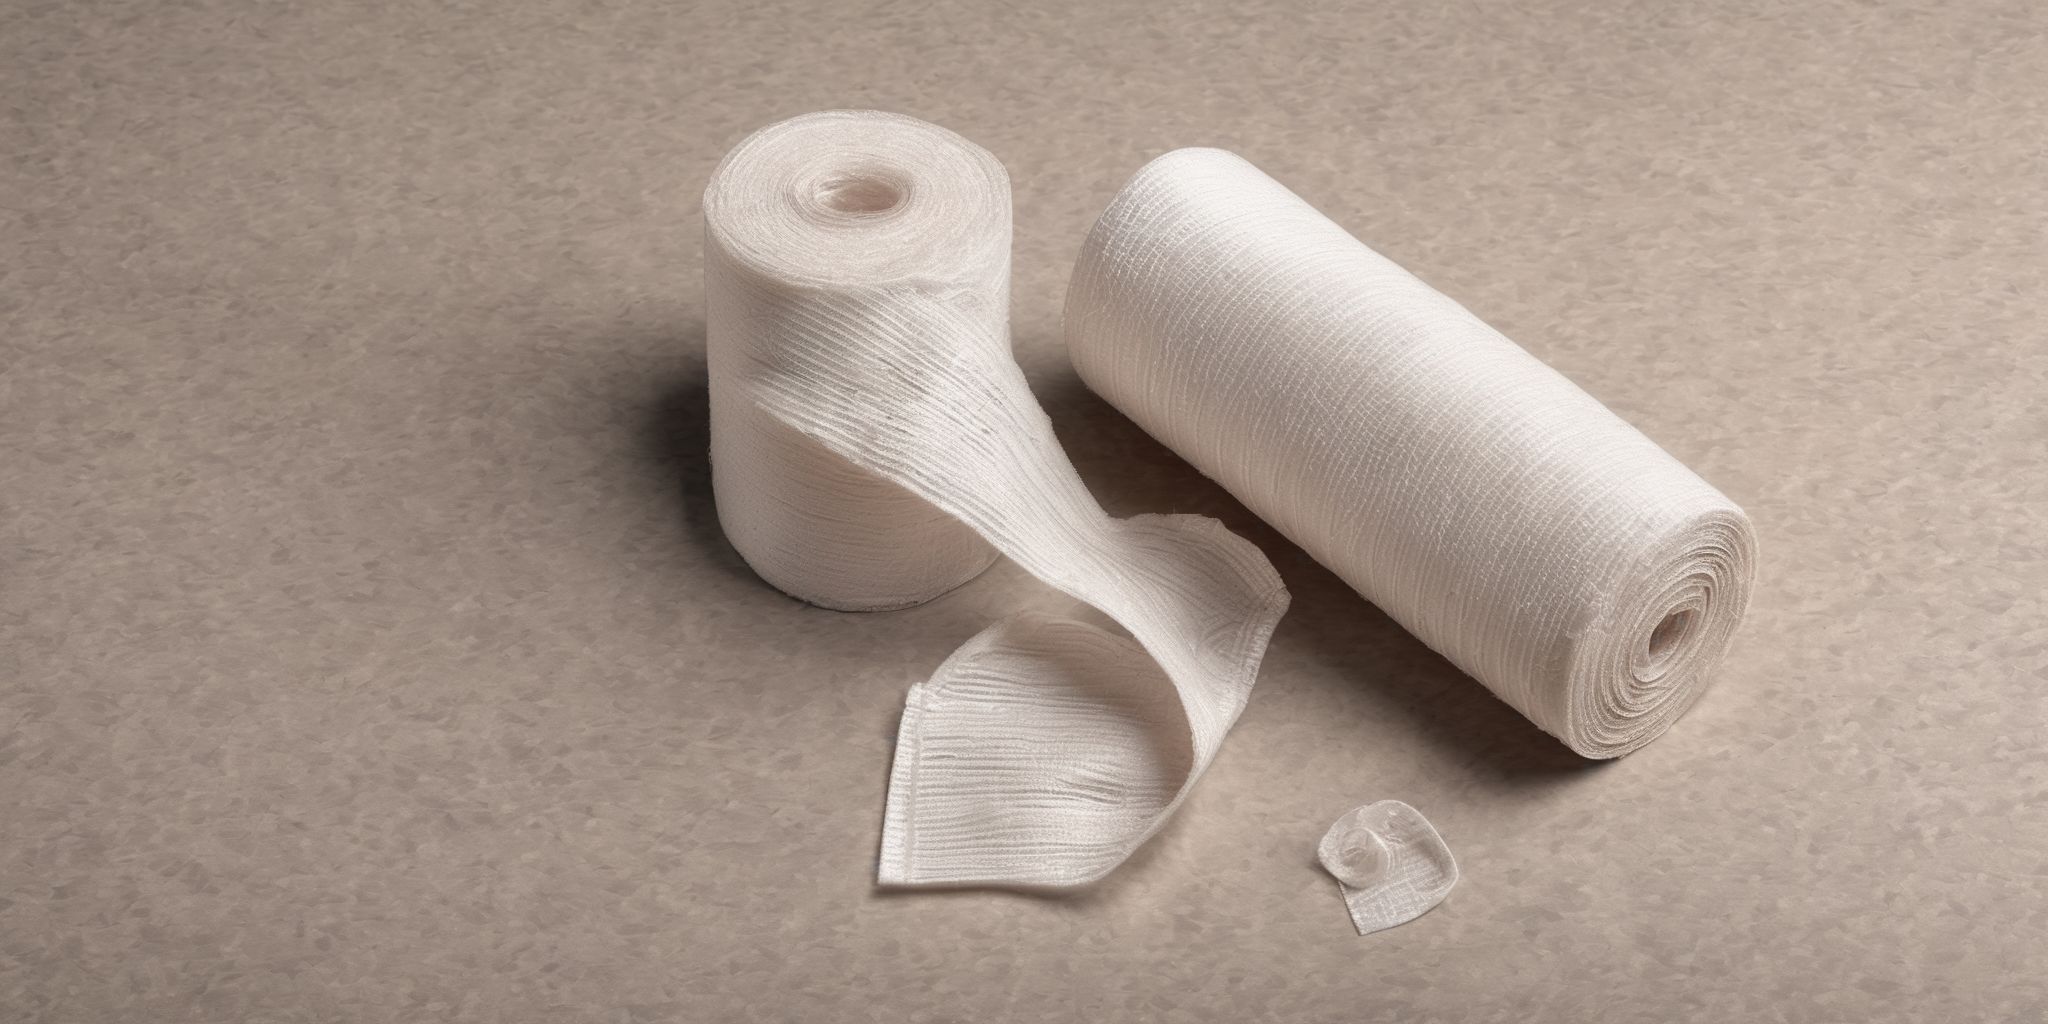 Bandage  in realistic, photographic style